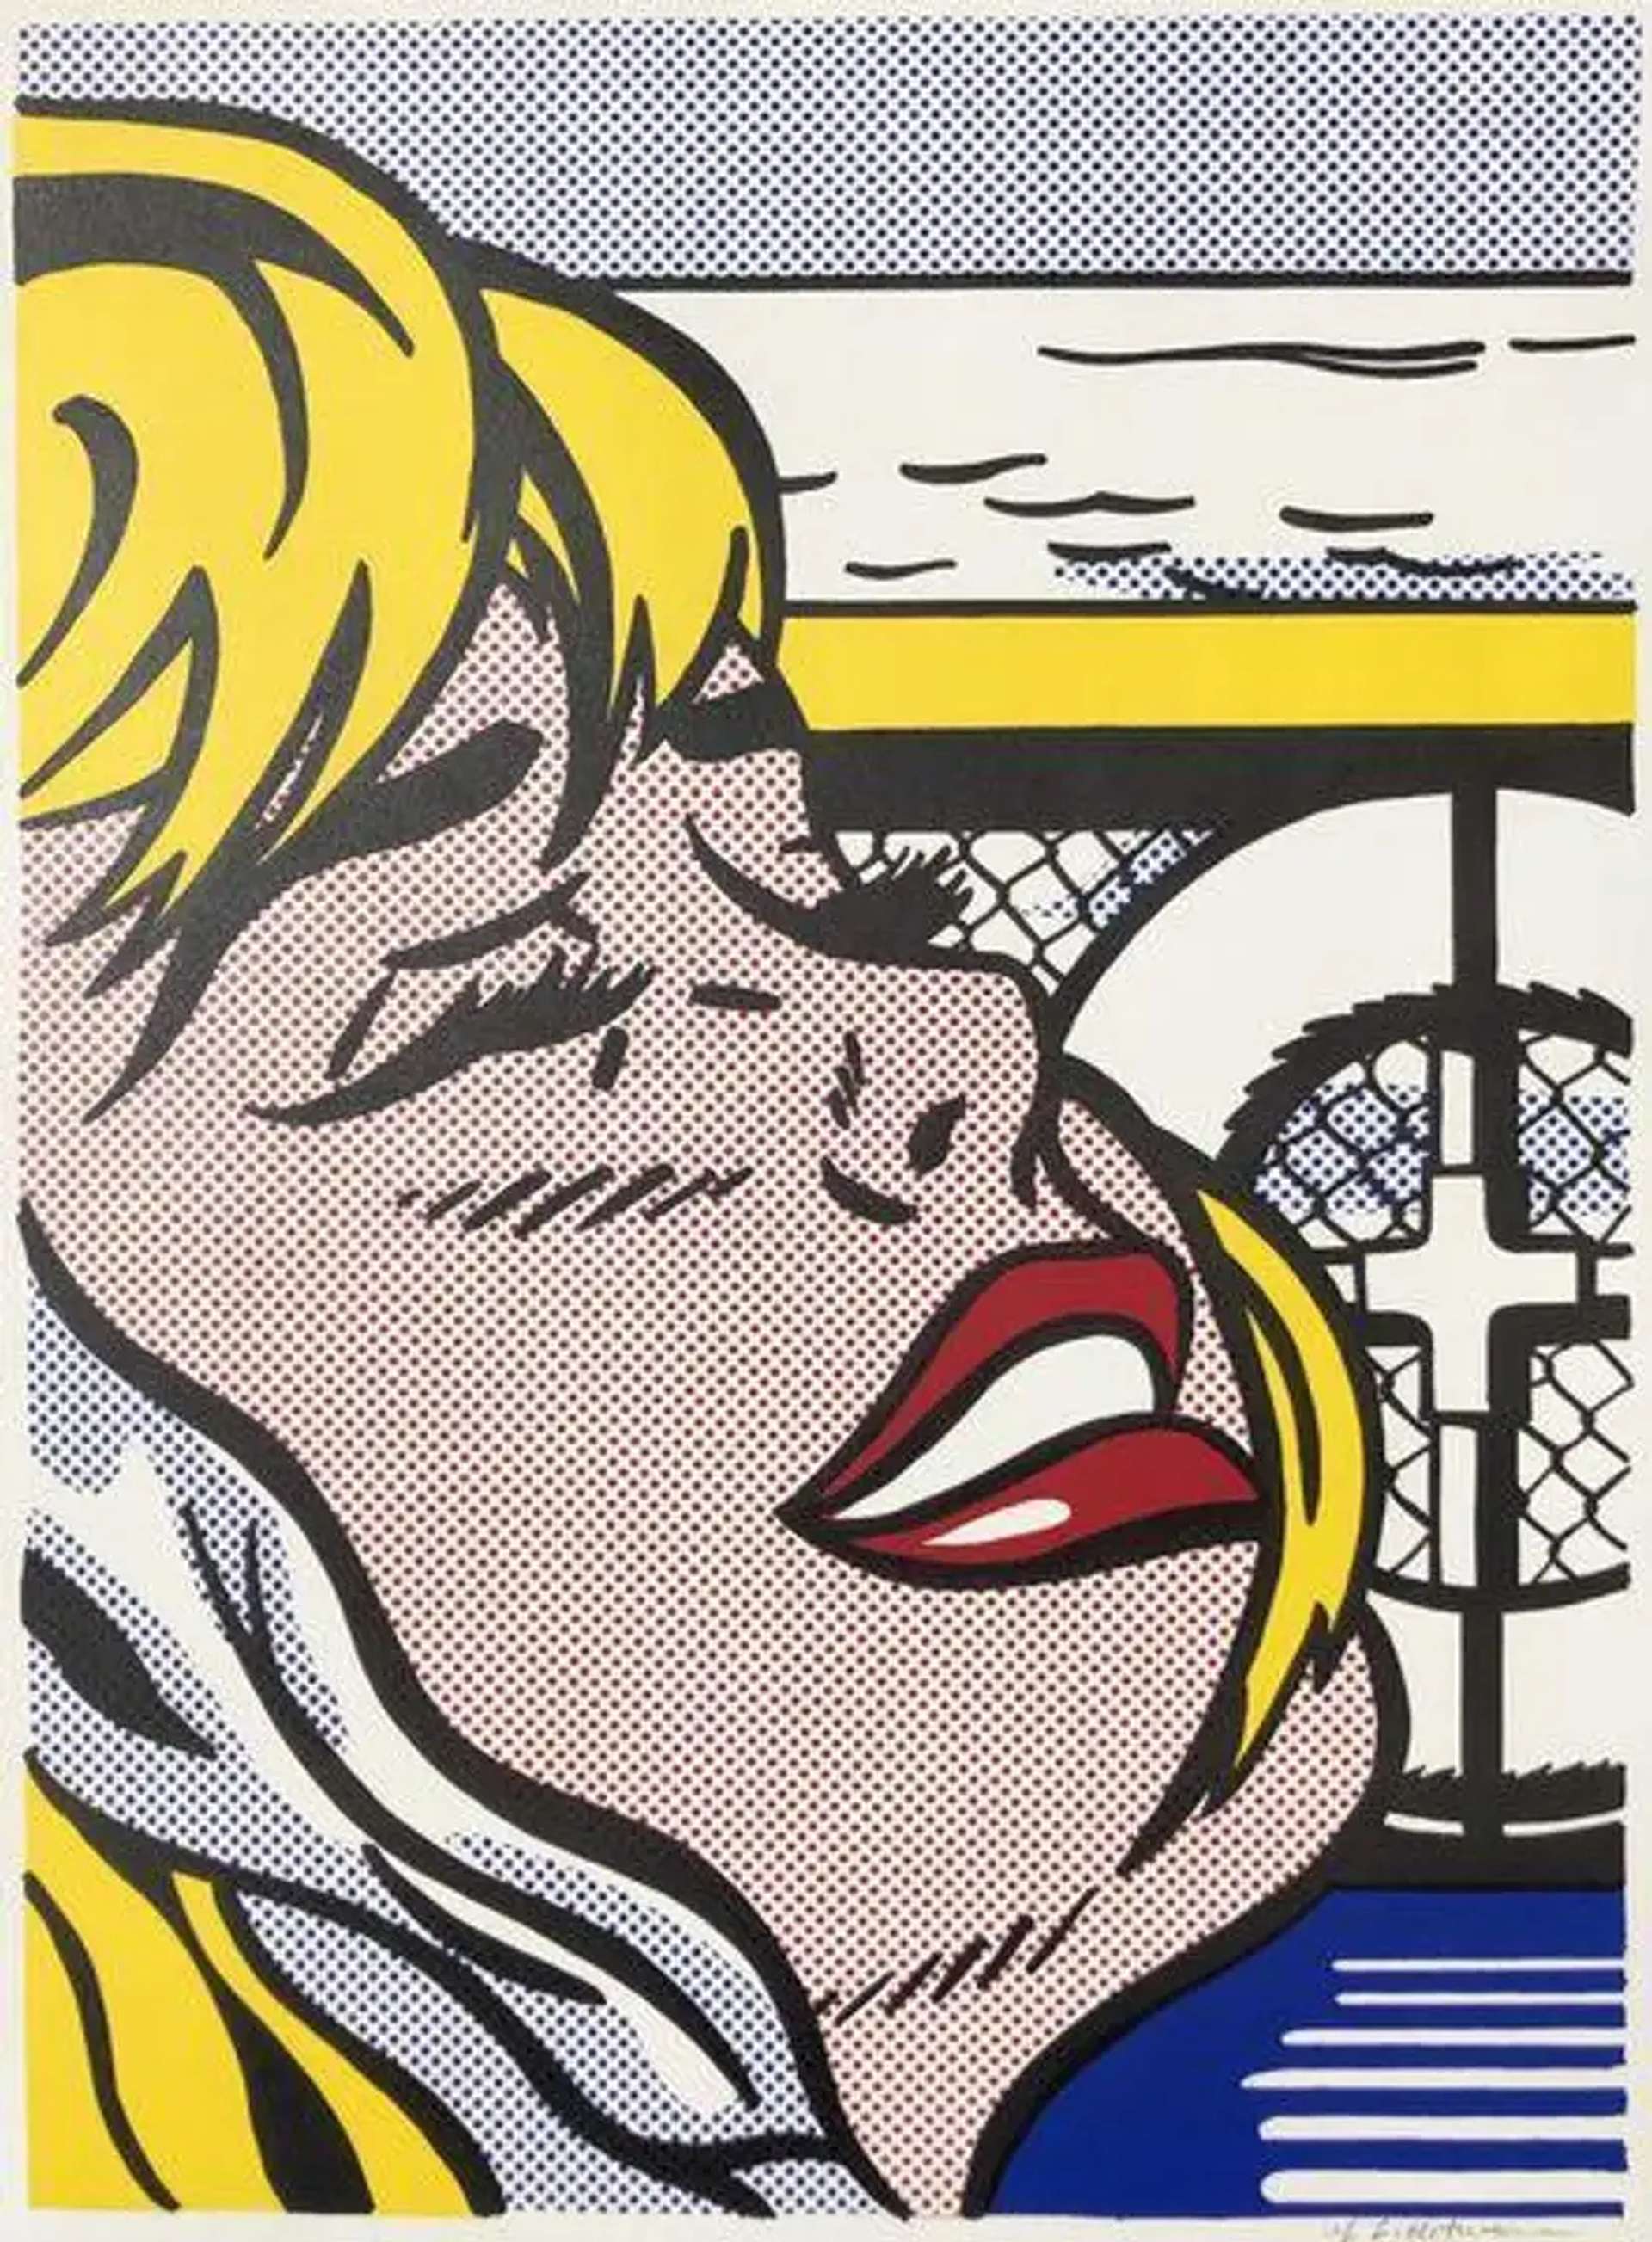 Image of a crying blonde woman, depicted in Roy Lichtenstein's typical primary colours and cartoon style. In the background is a ship deck, with the ocean and a lifebuoy.